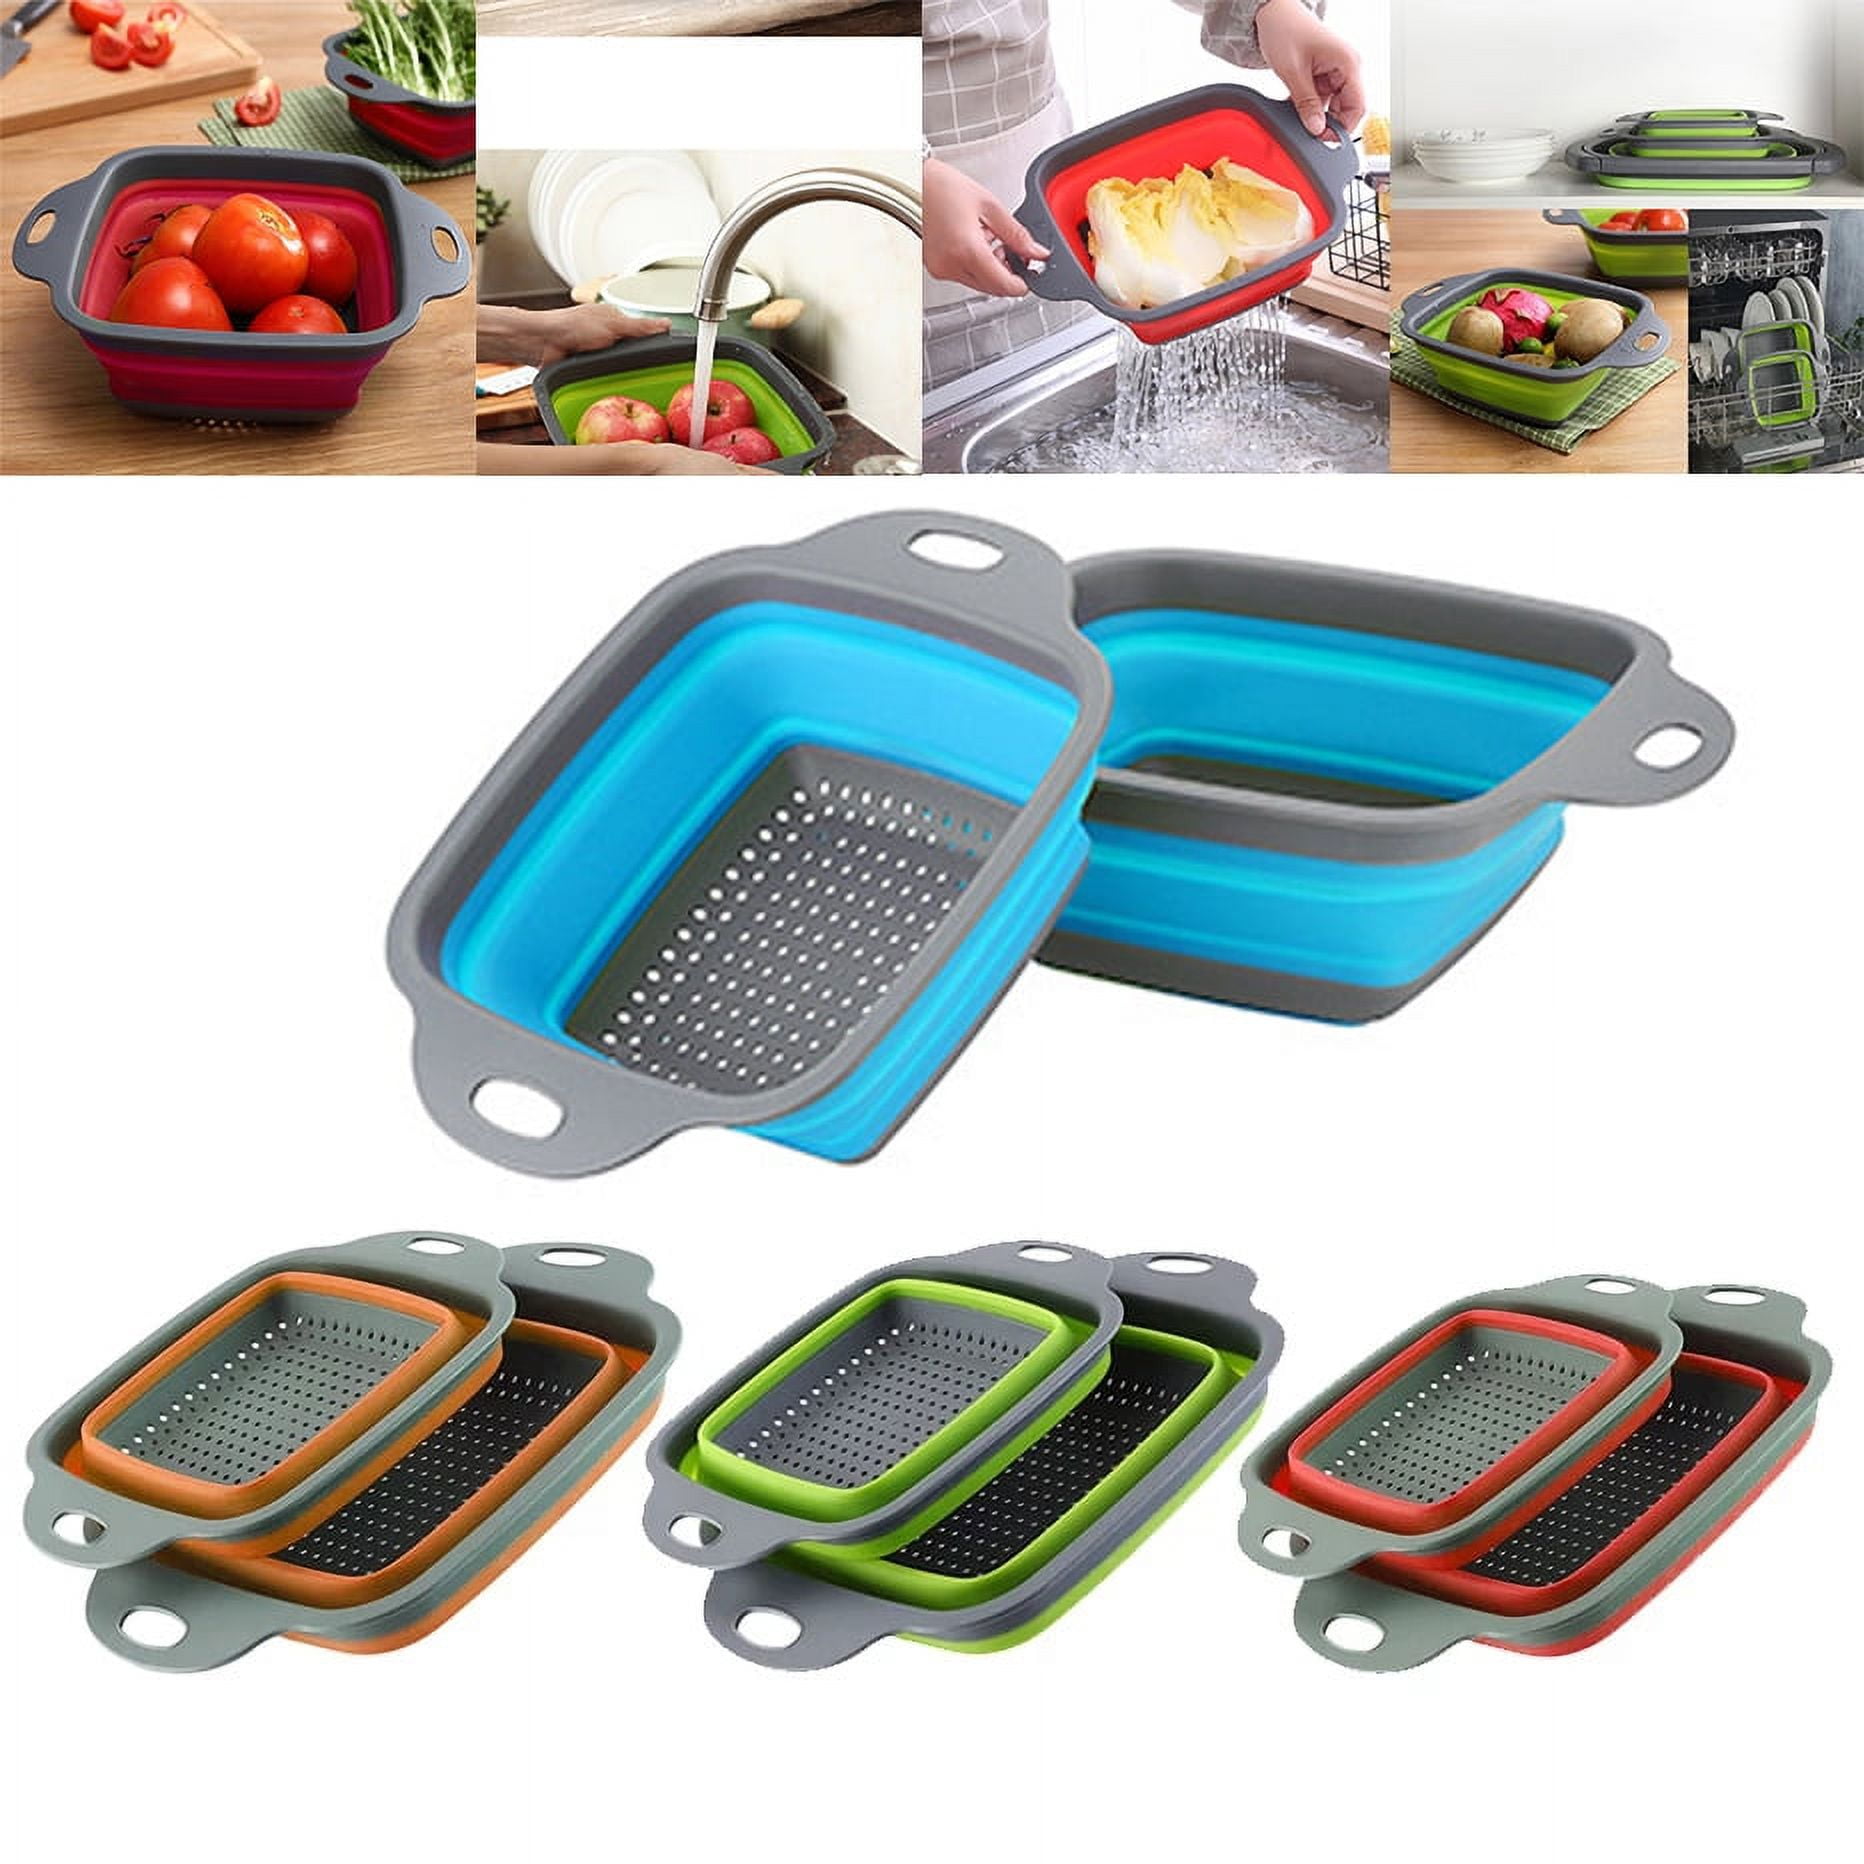 Foldable vegetable washing basket with handle silicone drain